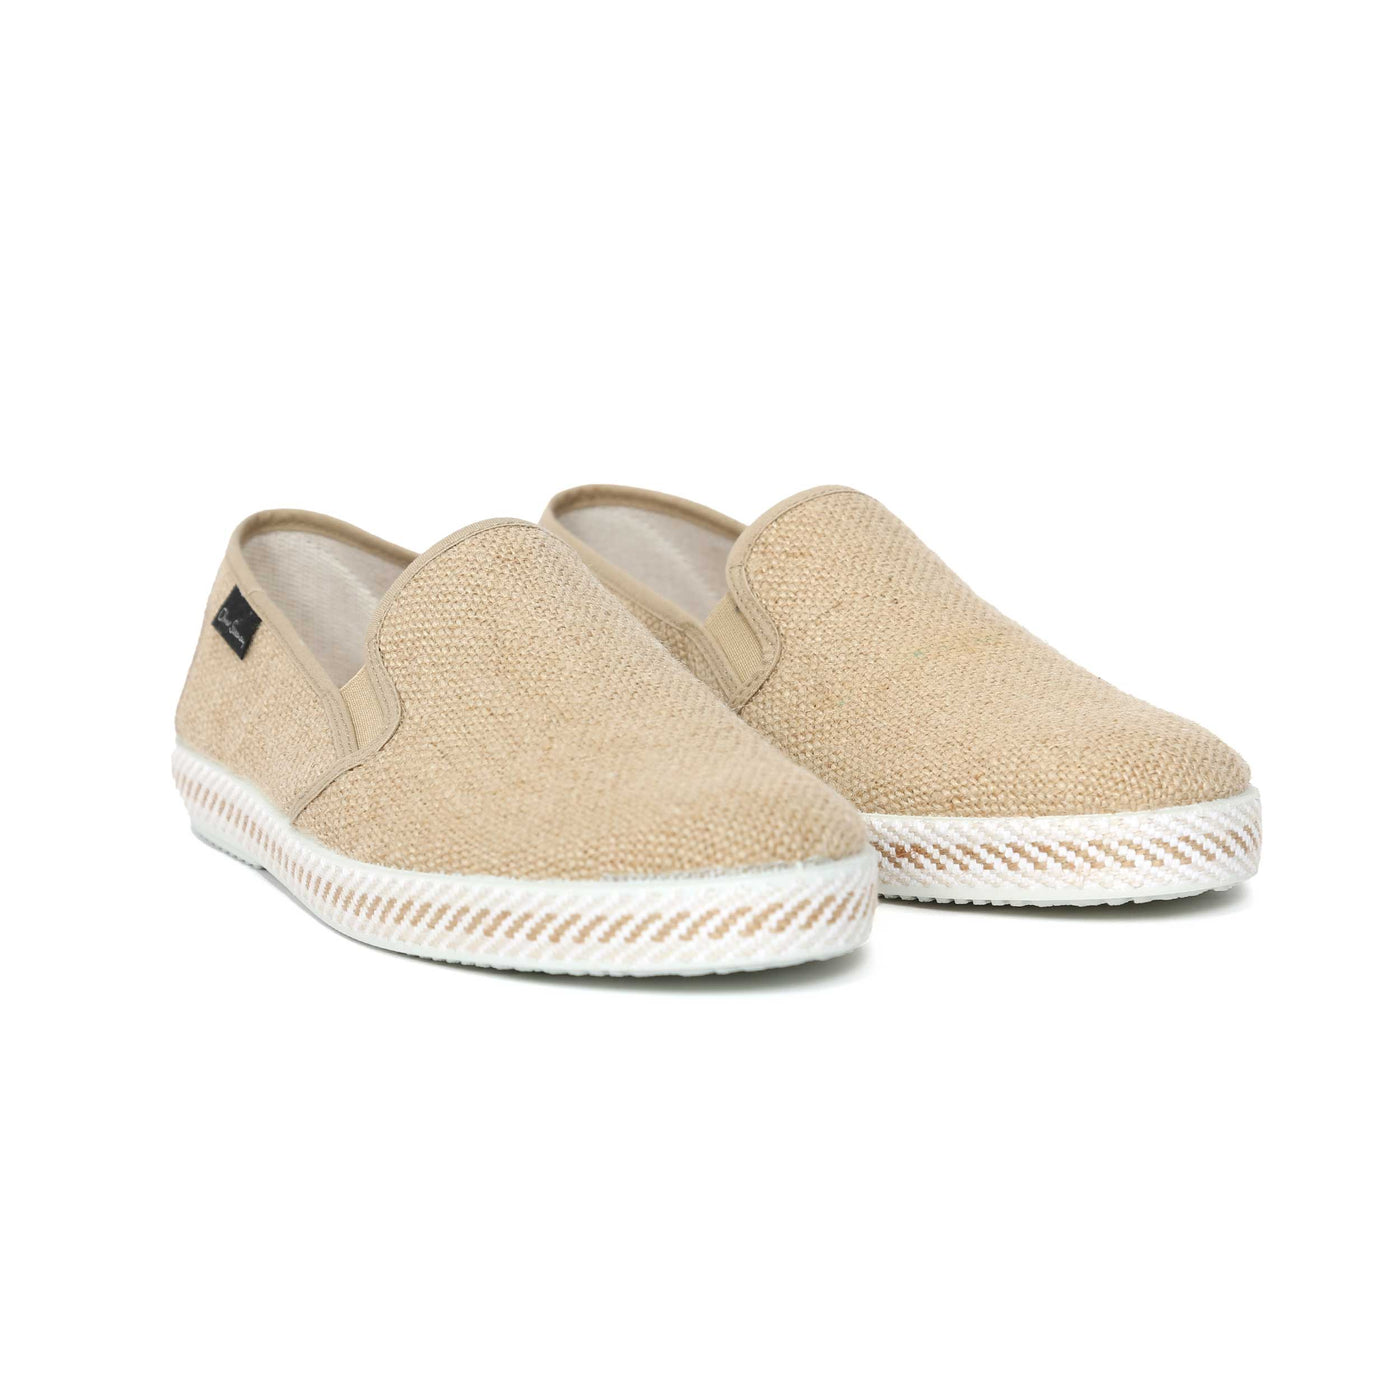 Oliver Sweeney Campomar Espadrille in Sand Pair